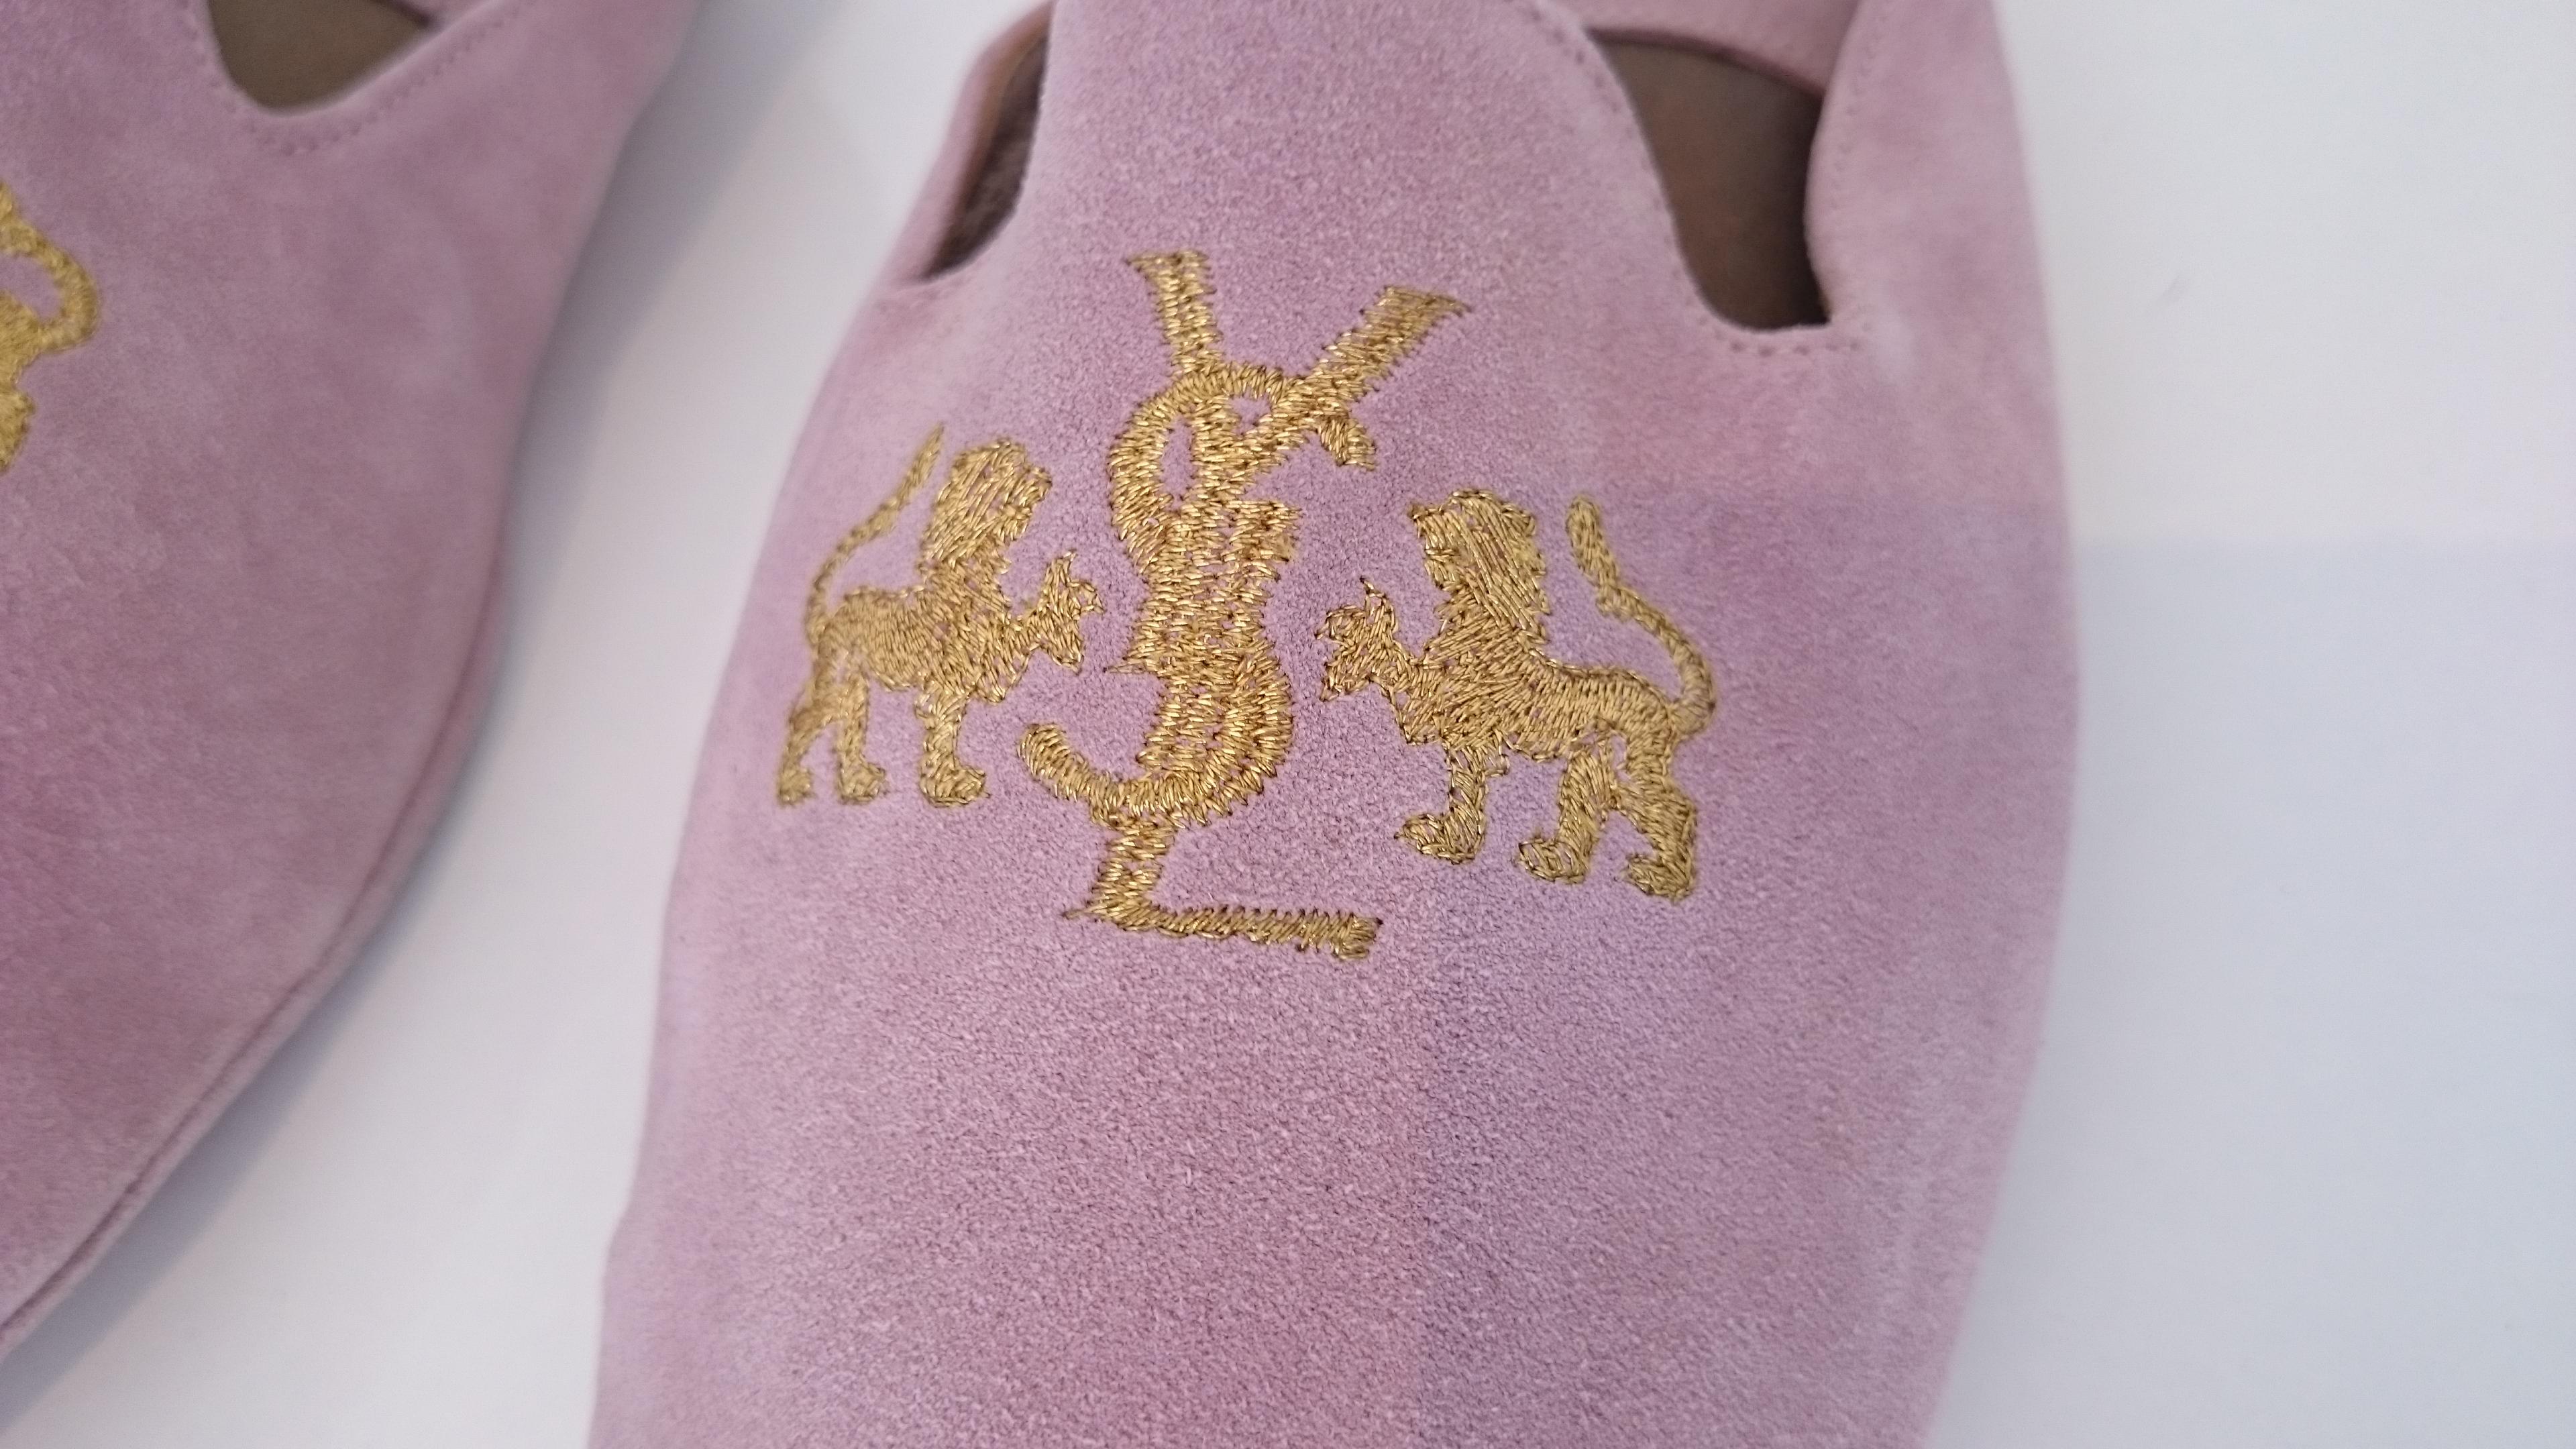 Gray Yves Saint Laurent Pink Suede Slippers for Home. NEW. Size 10 1/2  For Sale